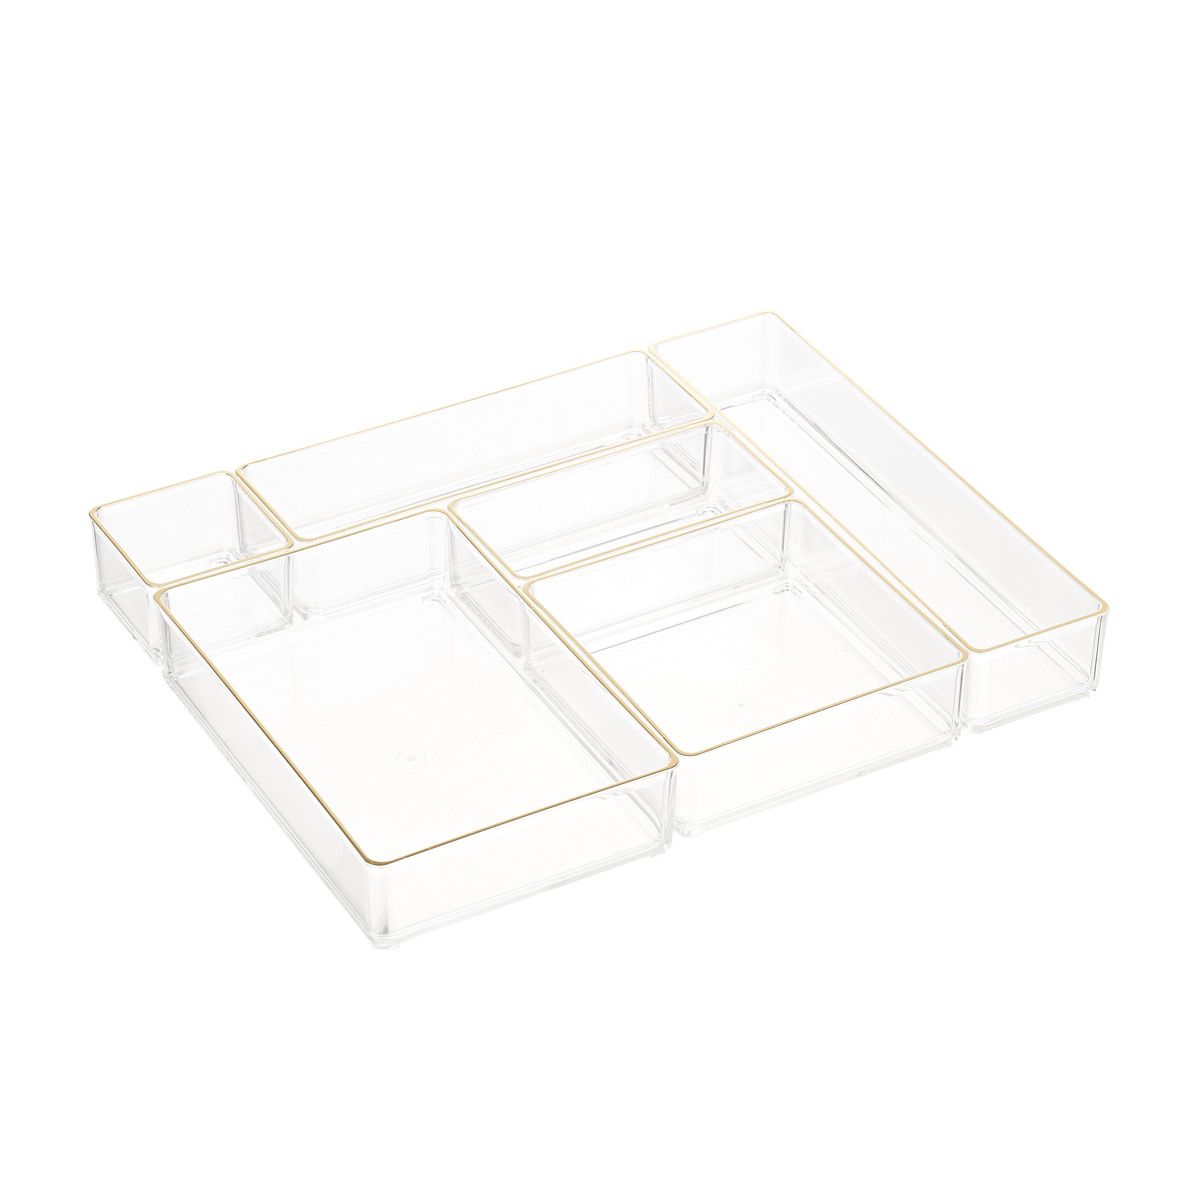 Acrylic Drawer Organizers Gold Trim Set of 6 | The Container Store